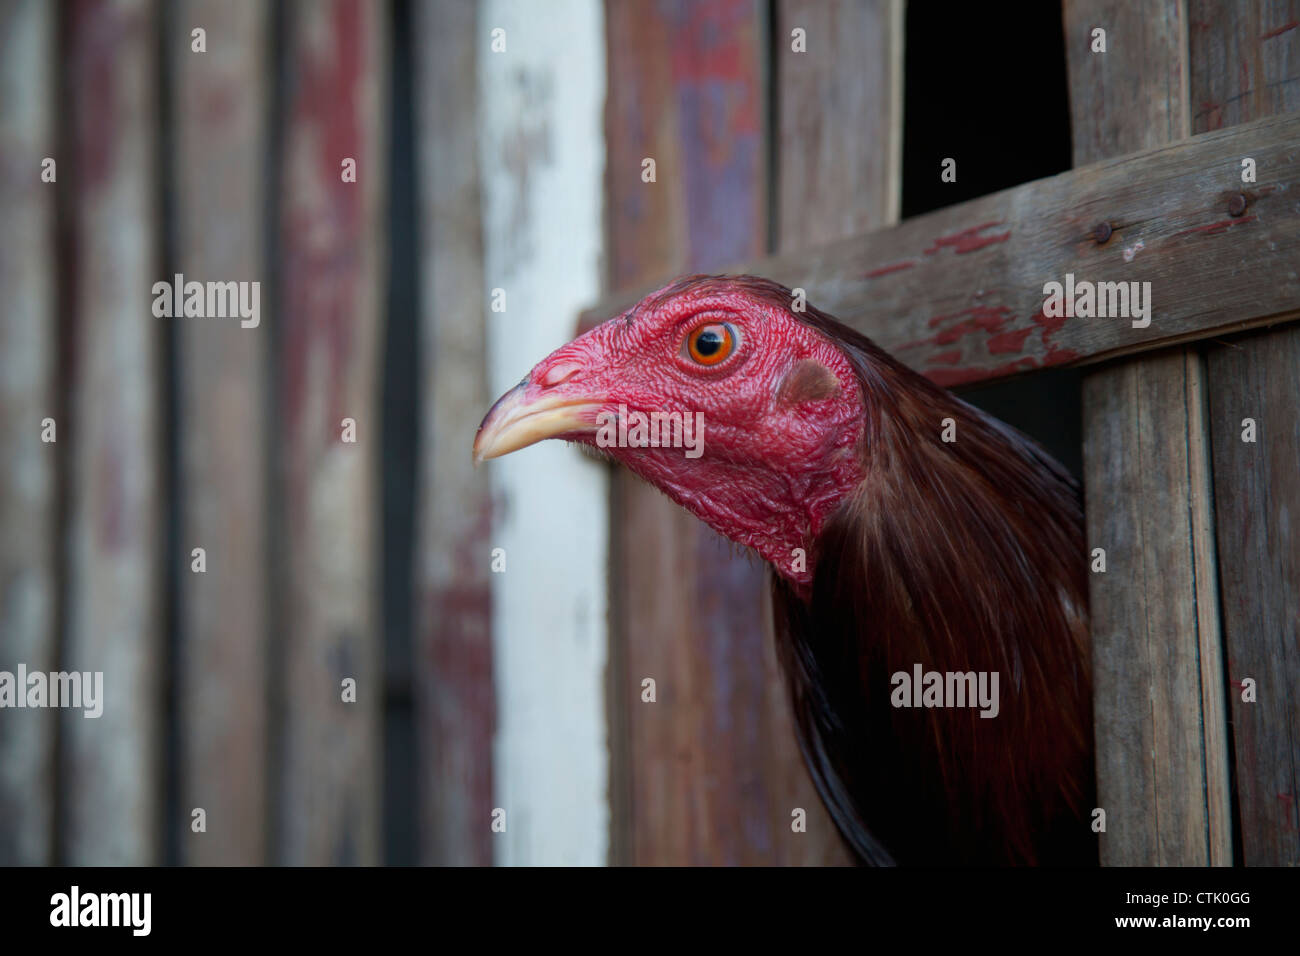 A Chicken With His Head Peeking Out Between Wooden Slats; El Nido Bacuit Archipelago, Palawan, Philippines Stock Photo